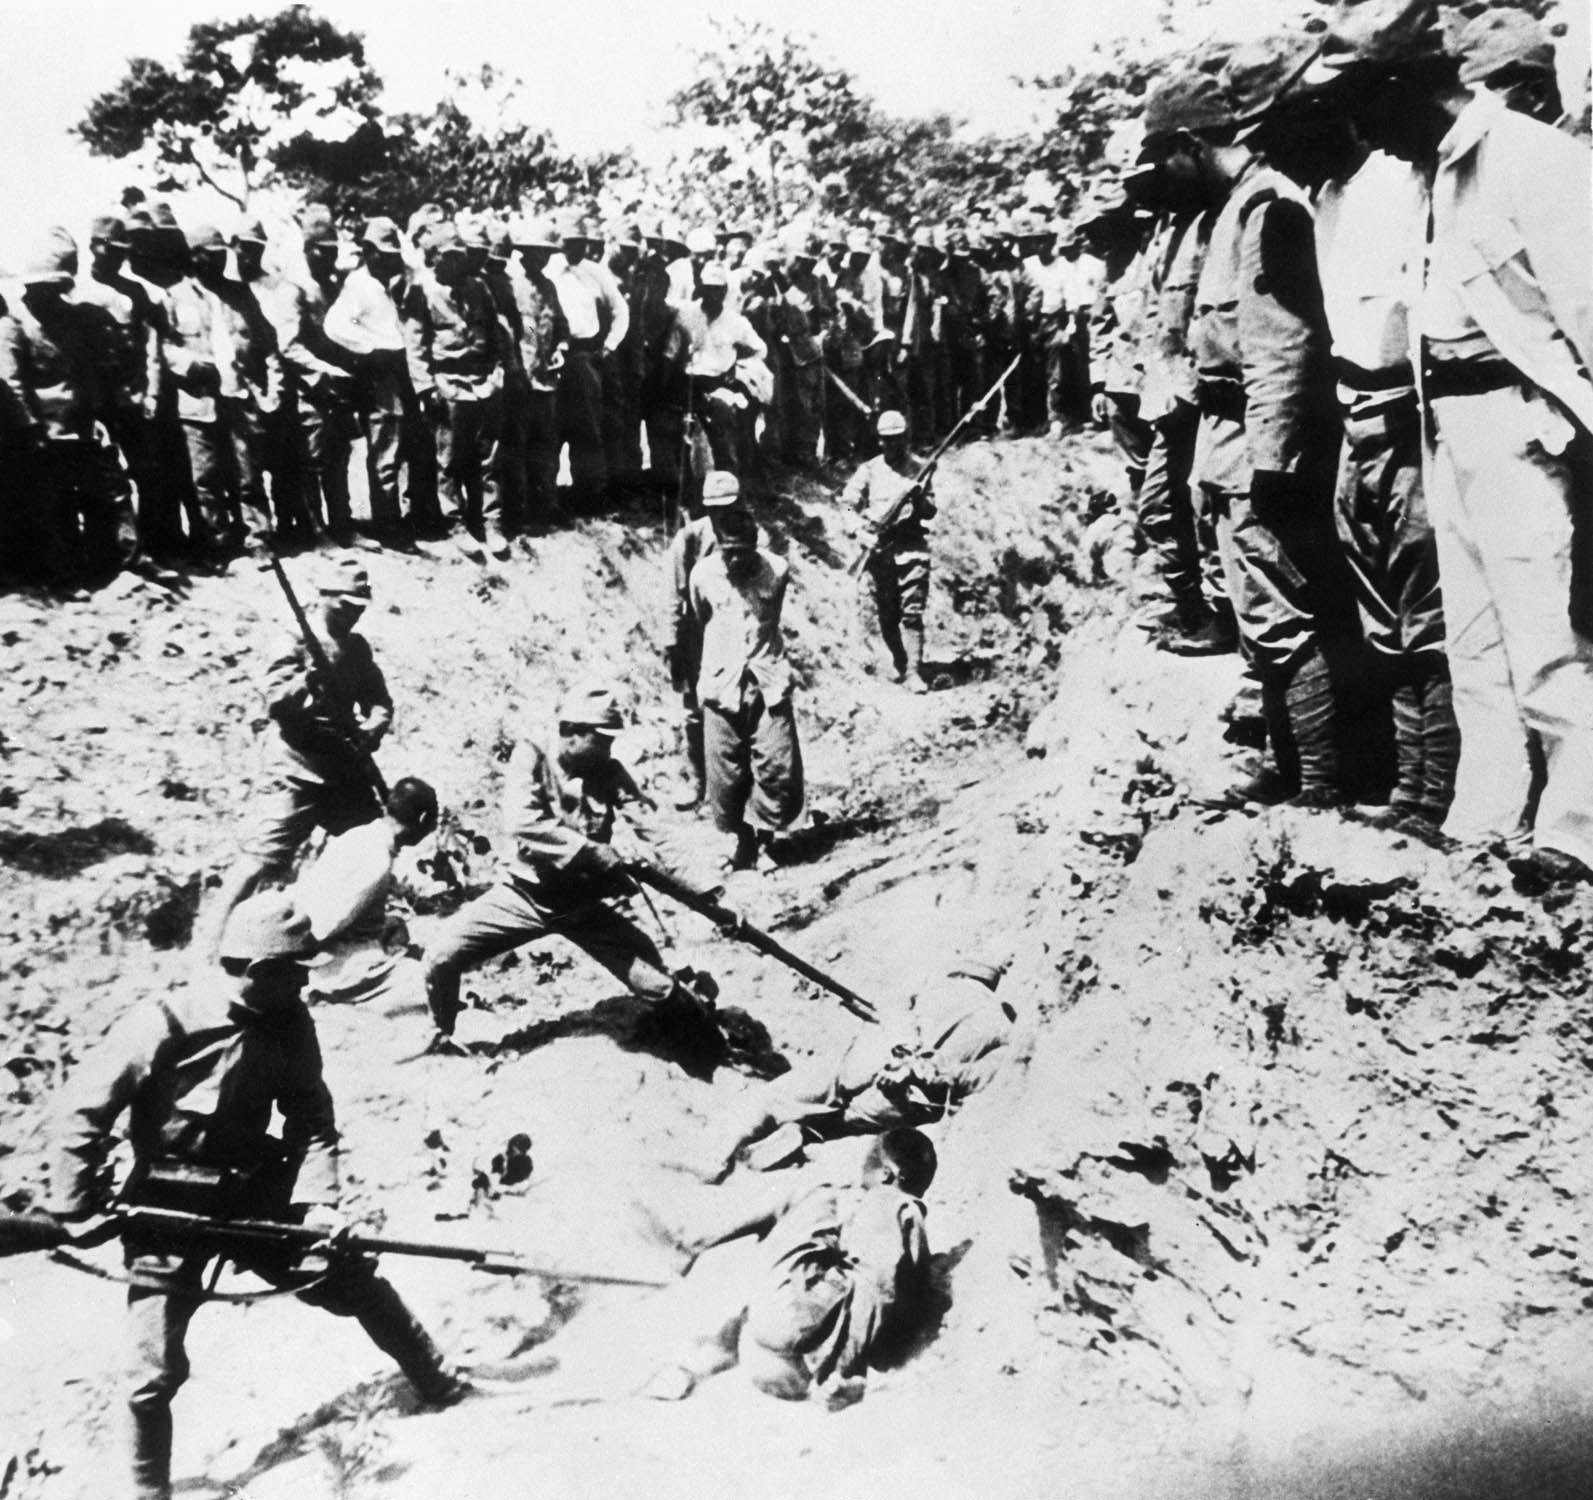 Chinese prisoners are used as live targets in a bayonet drill by their Japanese captors, during the Nanking Massacre, November 7, 1938.